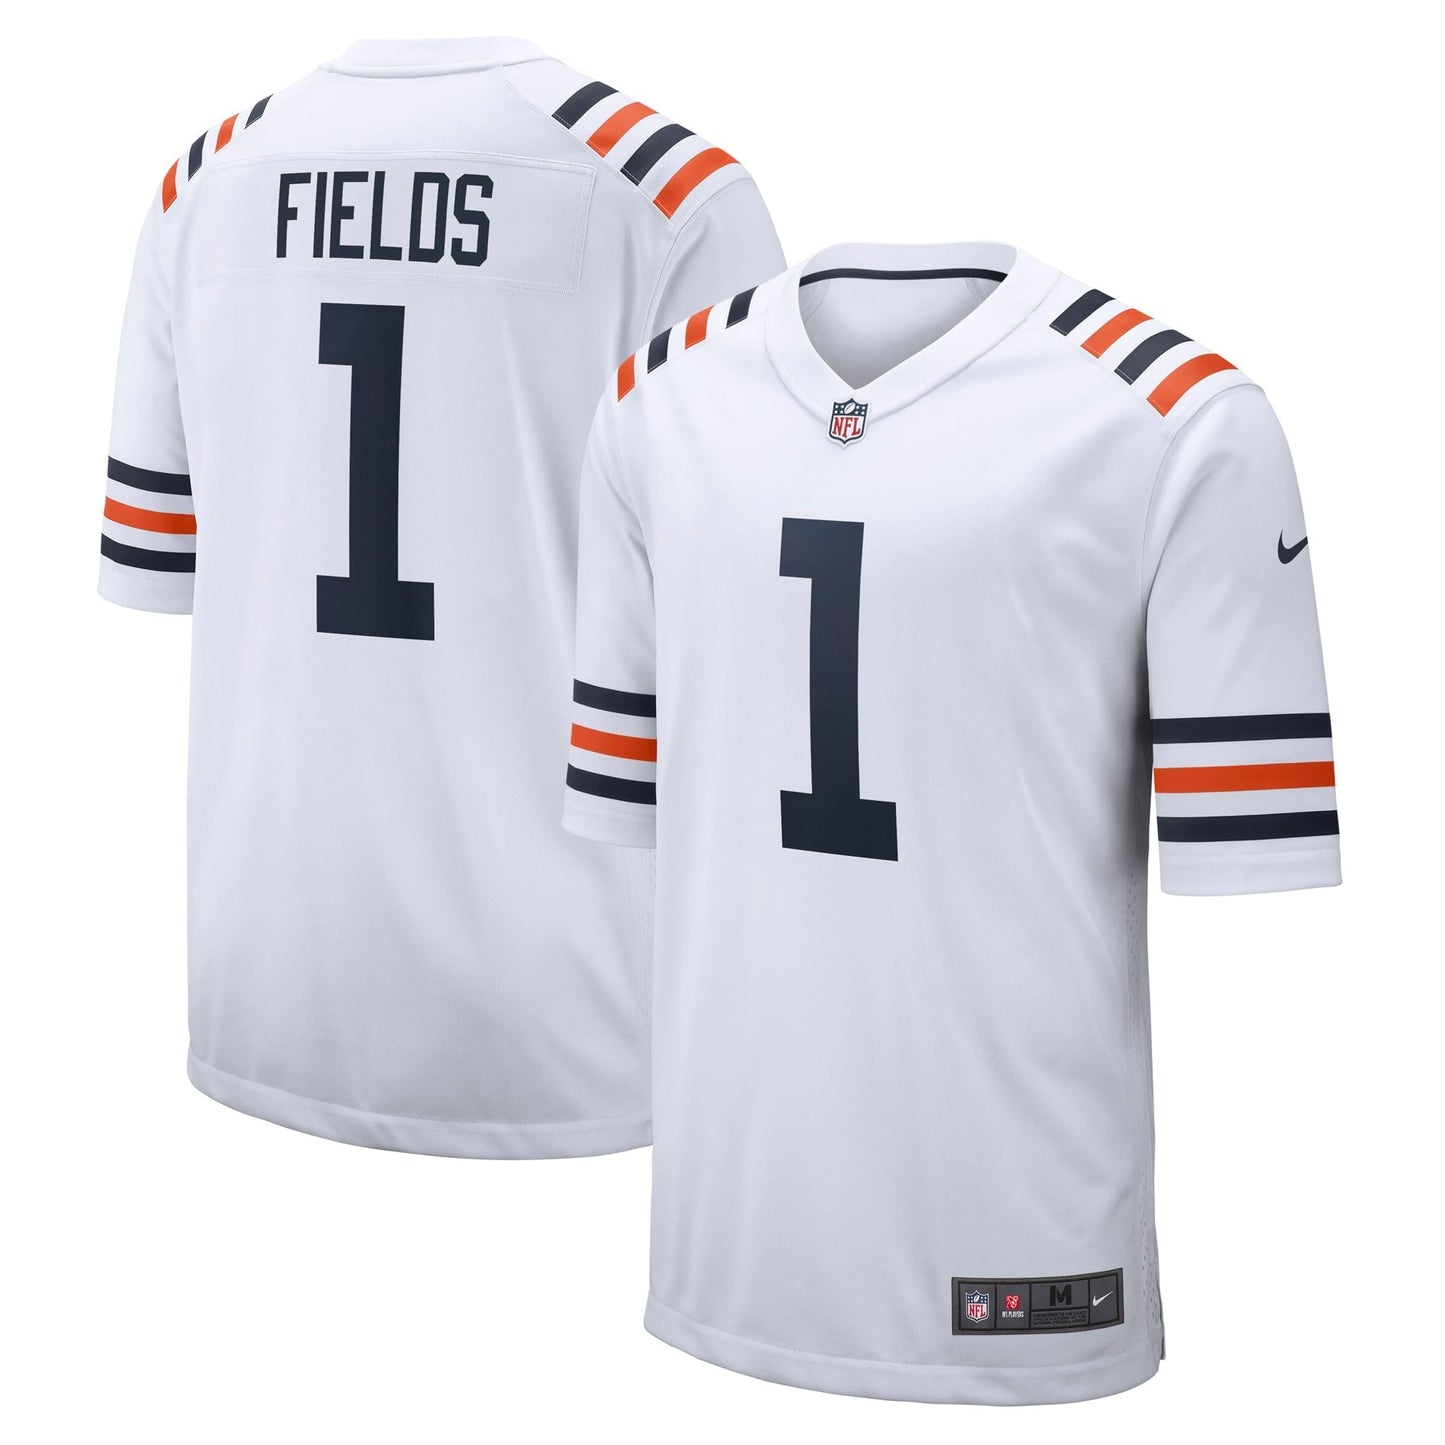 Men's Nike Justin Fields White Chicago Bears 2021 NFL Draft First Round Pick Alternate Classic Game Jersey